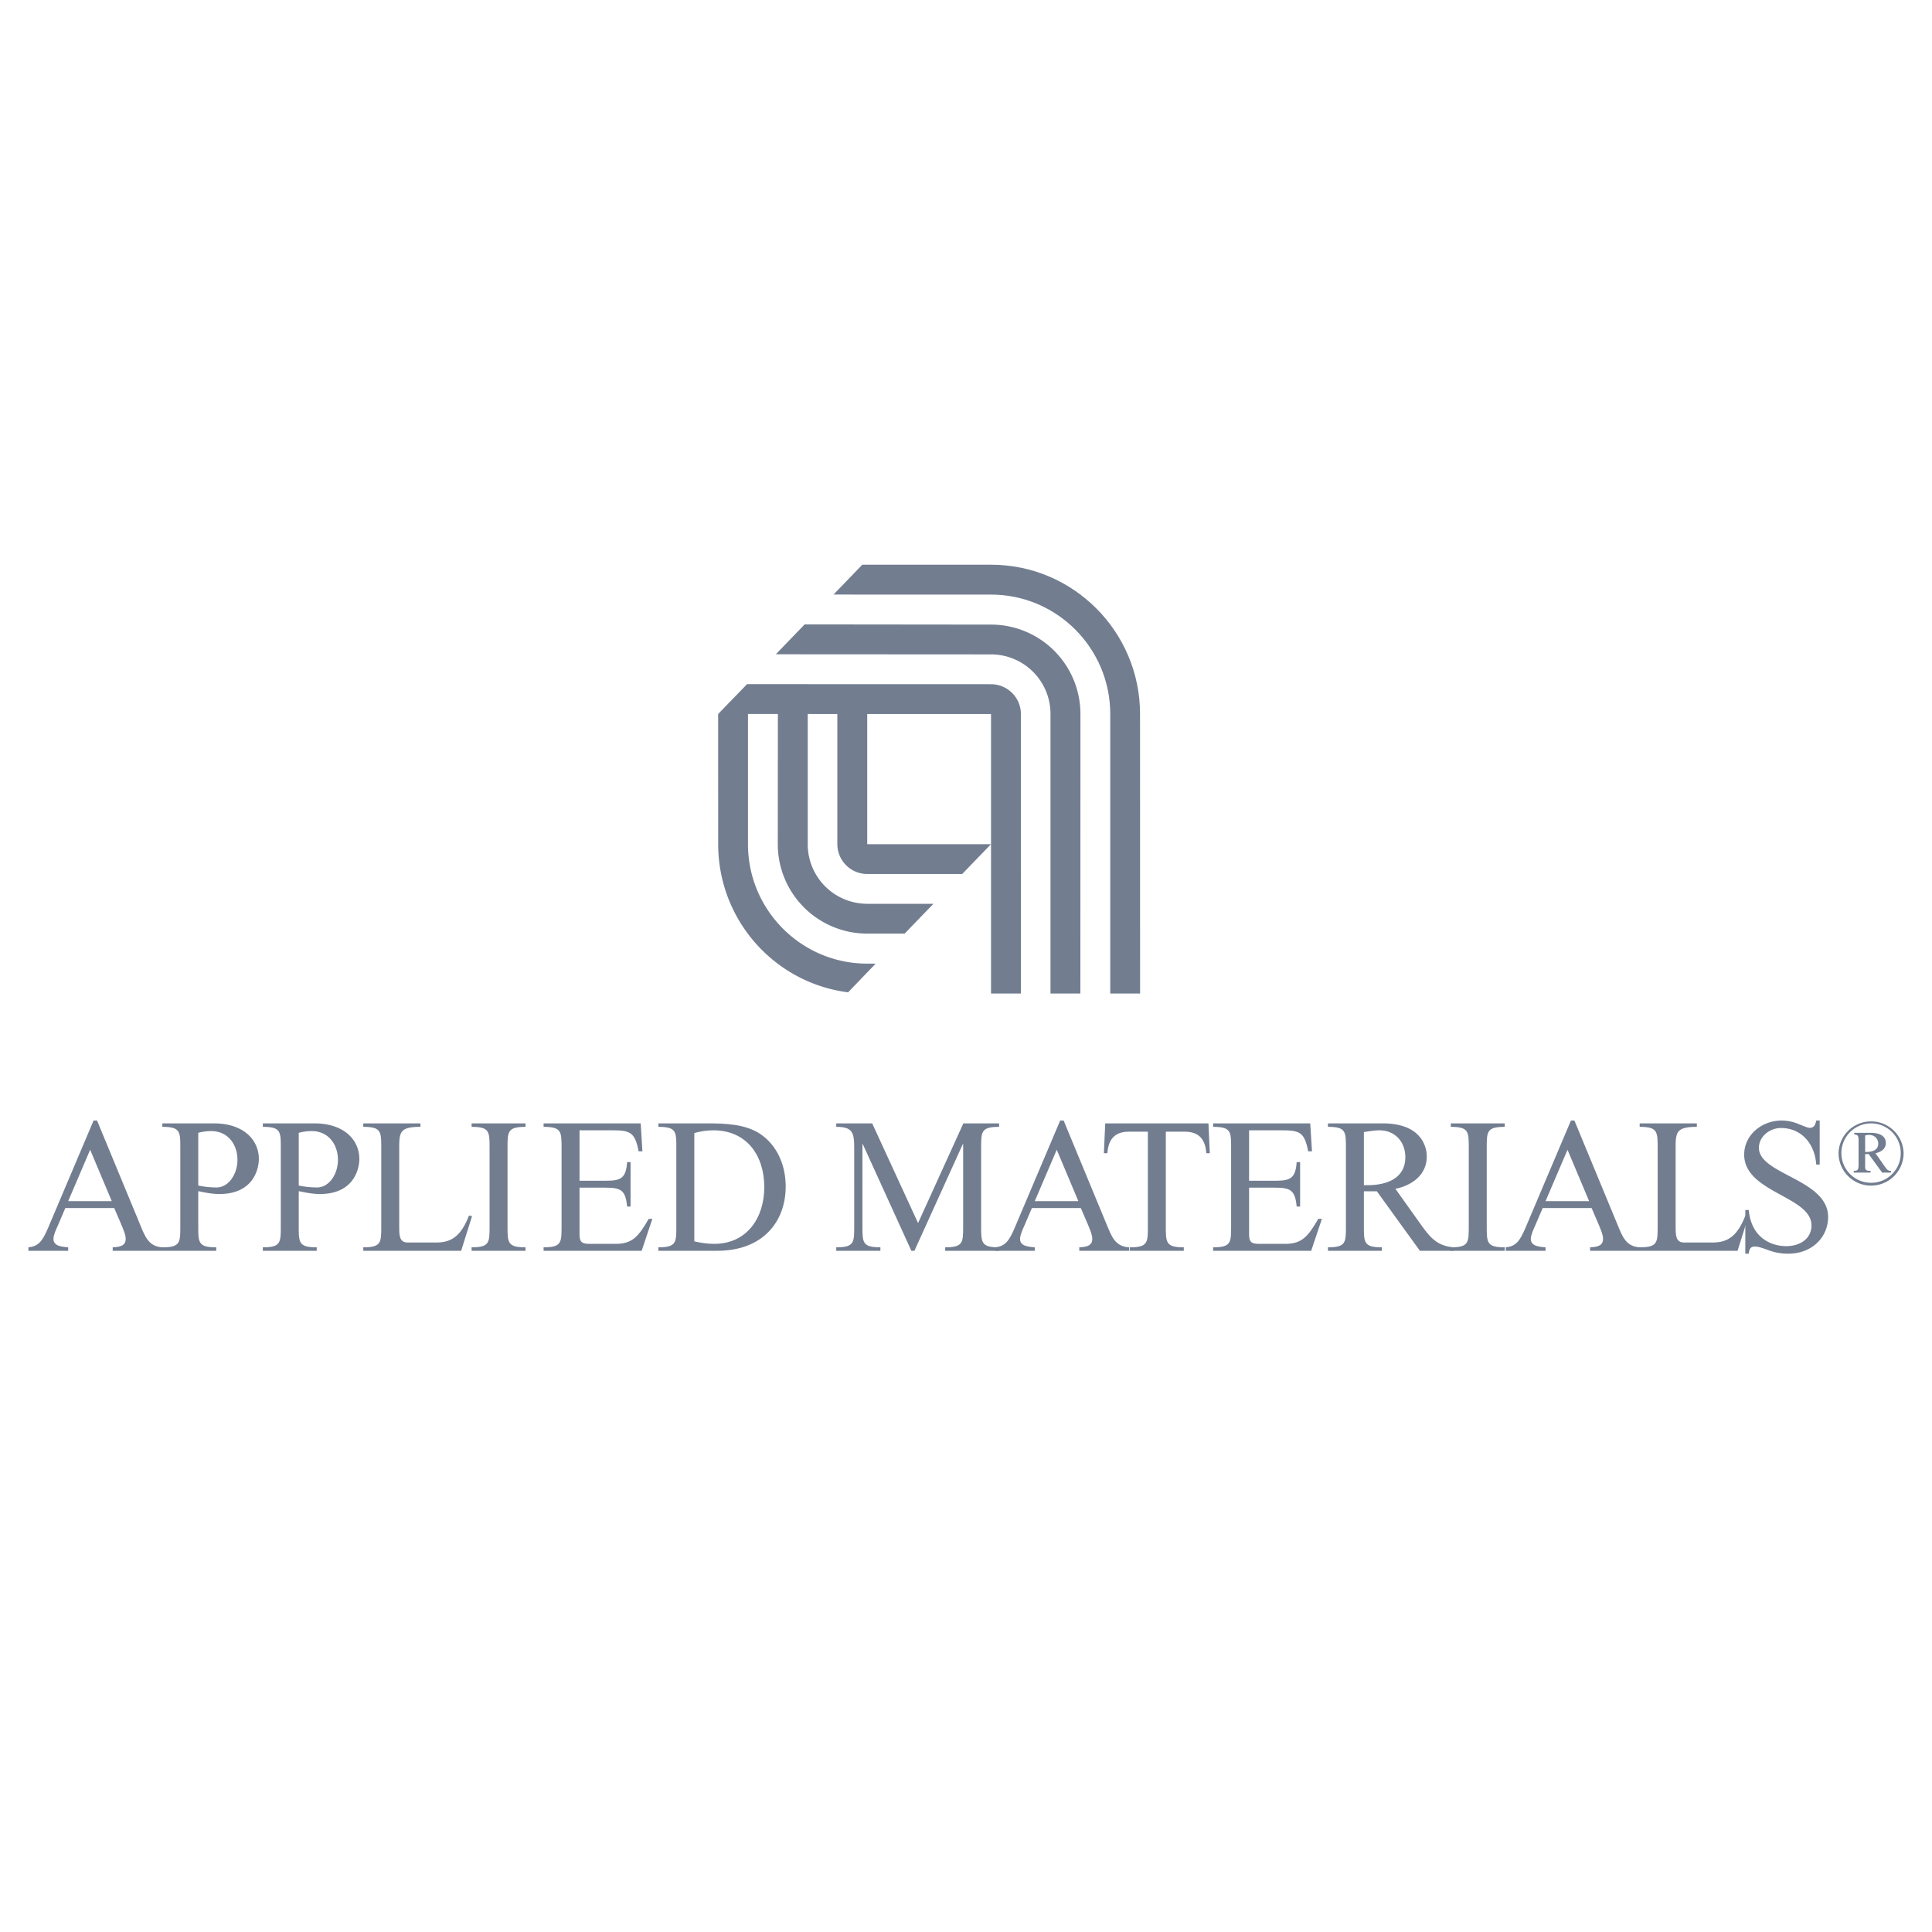 Applied Materials logo colors